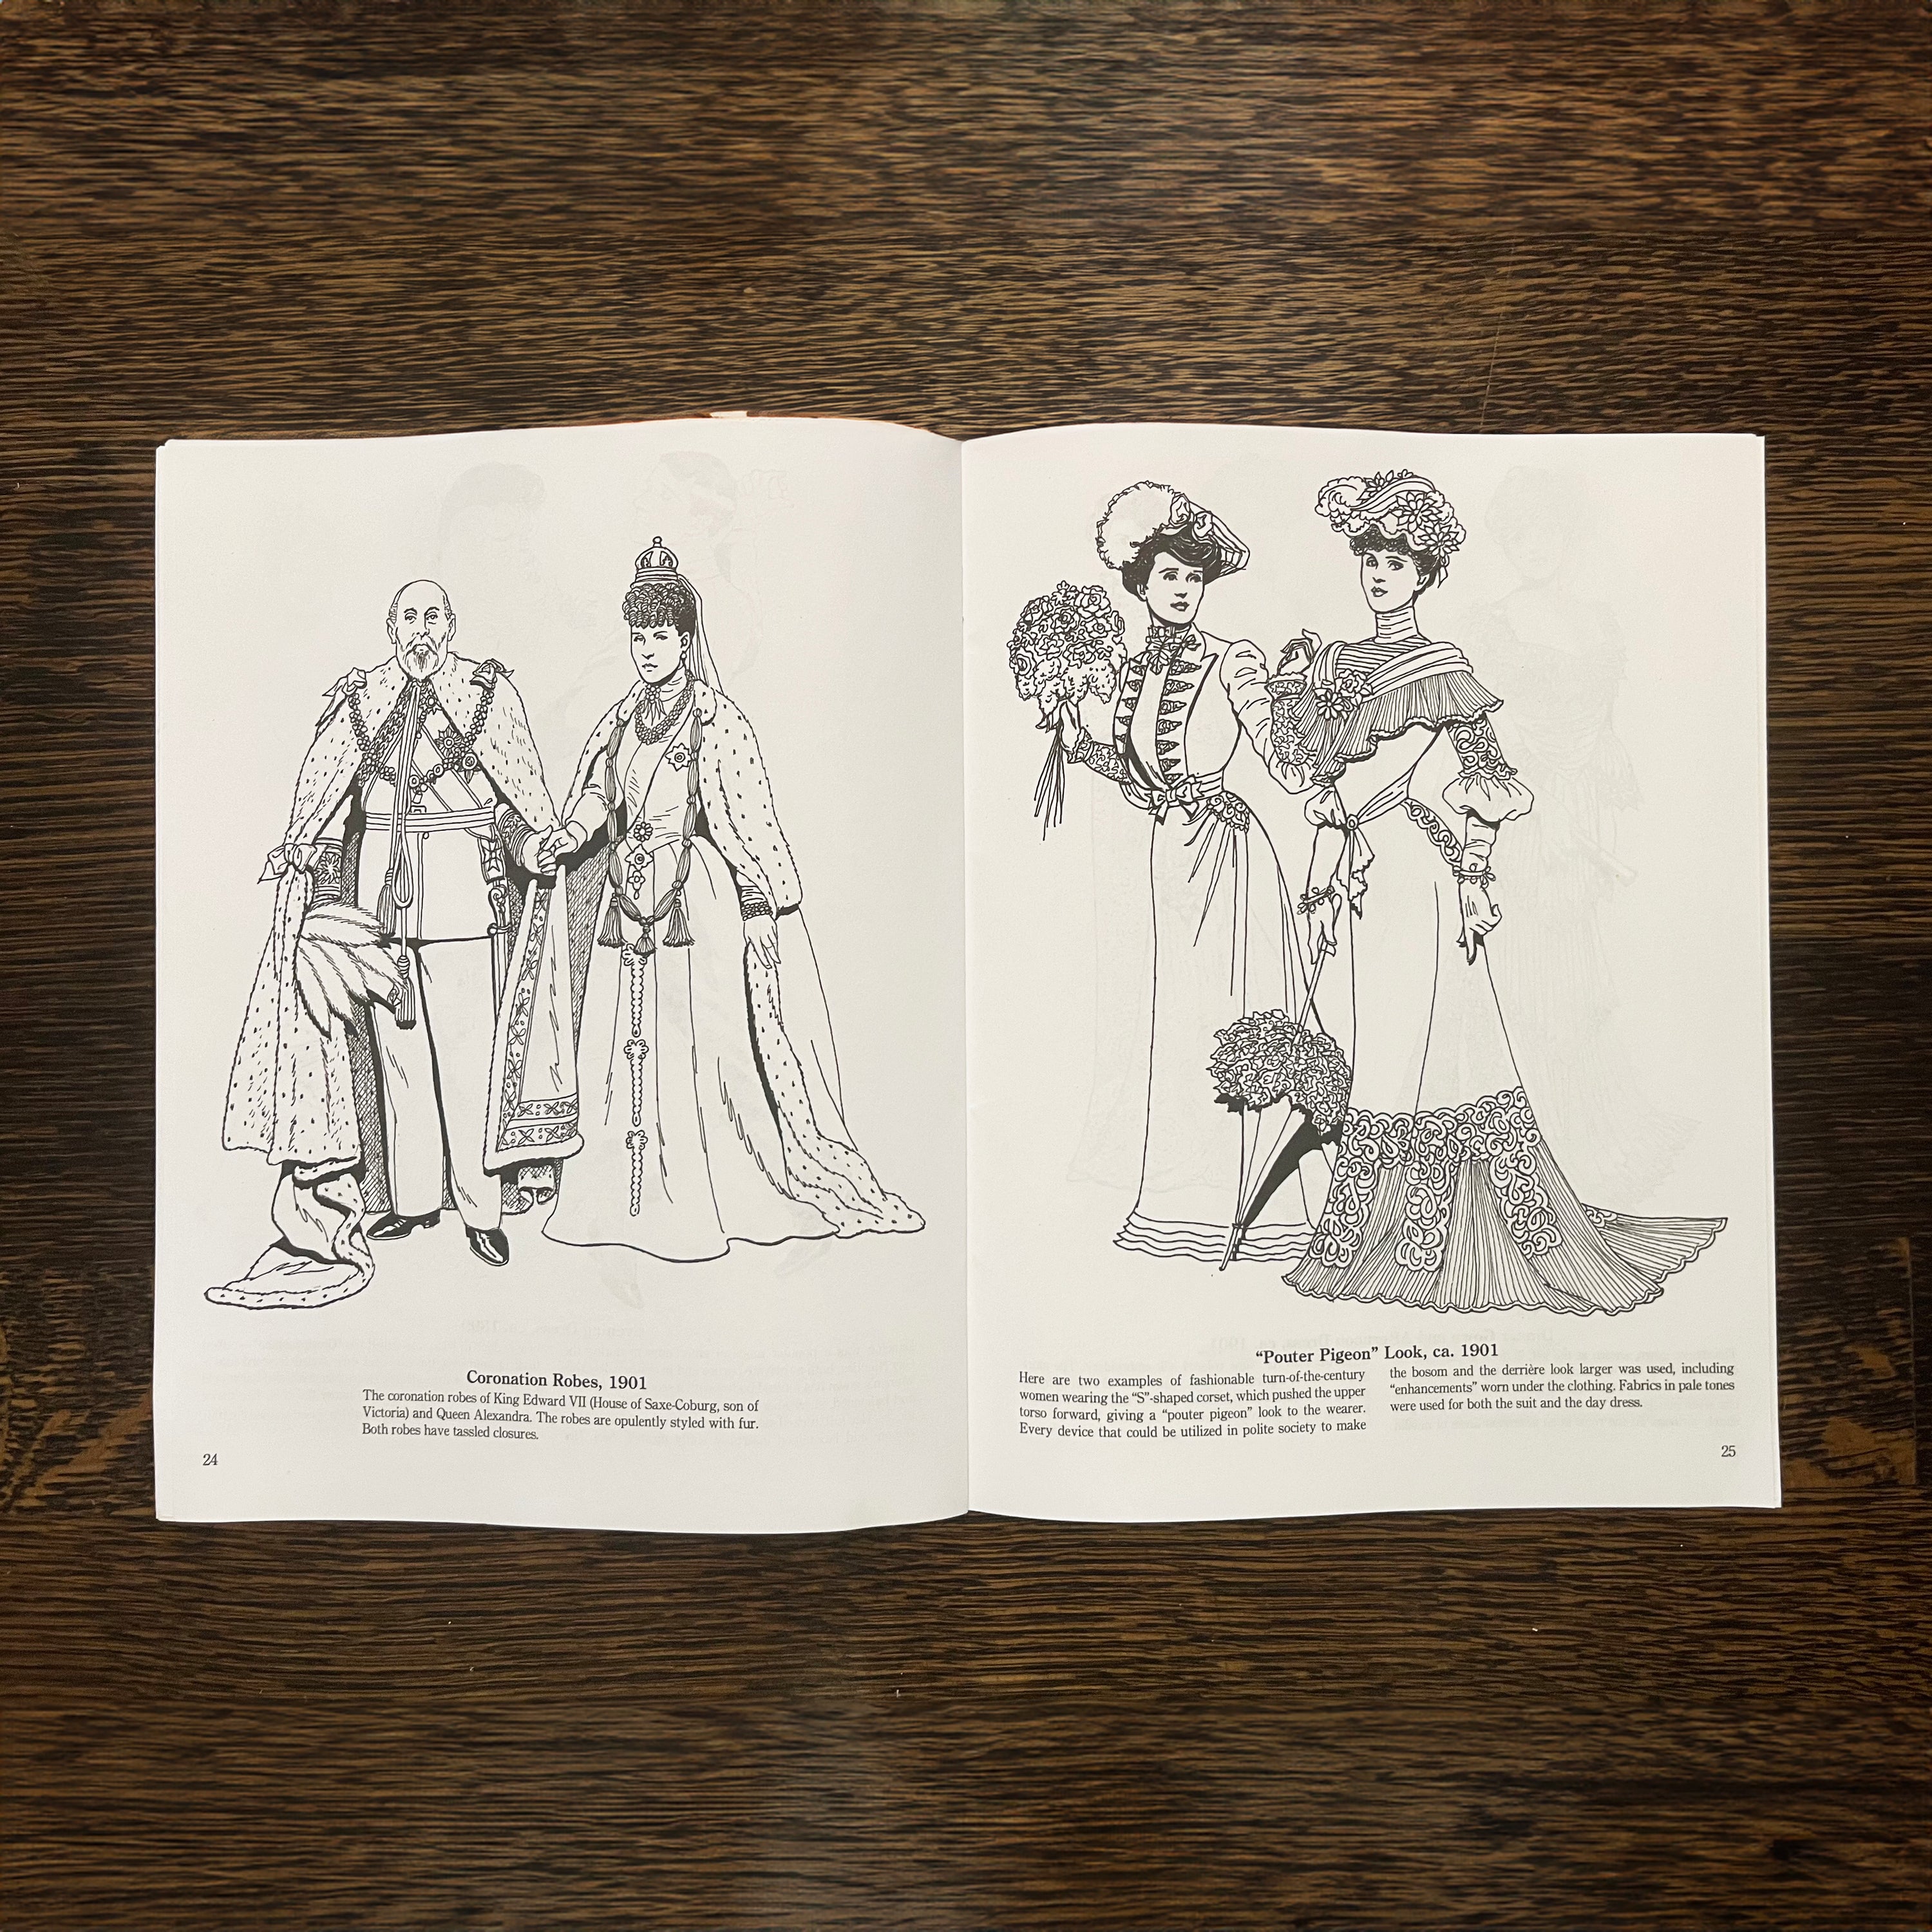 Late Victorian and Edwardian Fashions Coloring Book